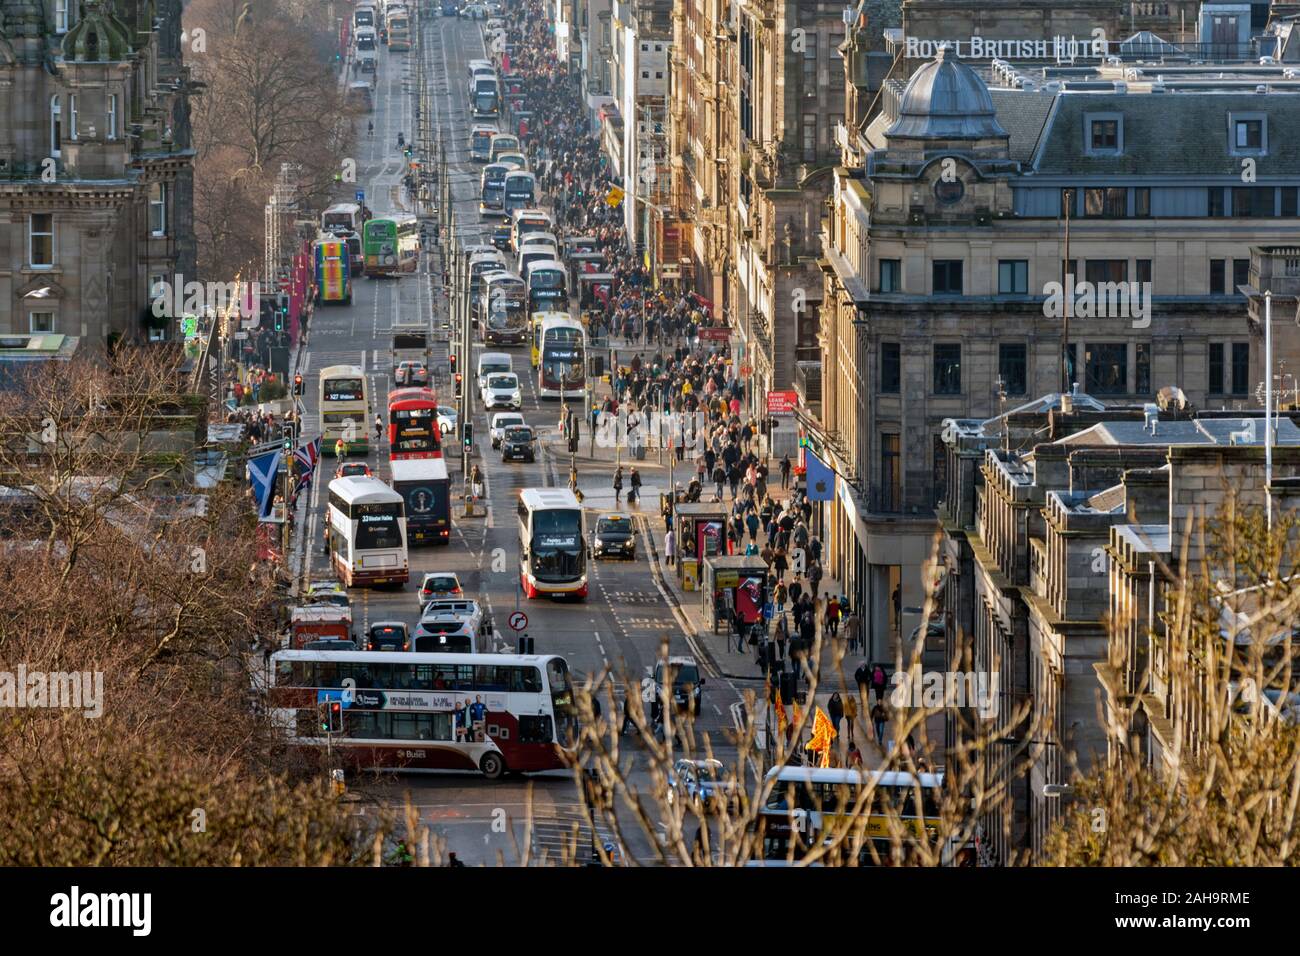 EDINBURGH SCOTLAND CITY VIEW PRINCES STREET WITH CROWDS ON THE PAVEMENT AND TRAFFIC CONGESTION WITH APPROXIMATELY TWENTY BUSES Stock Photo